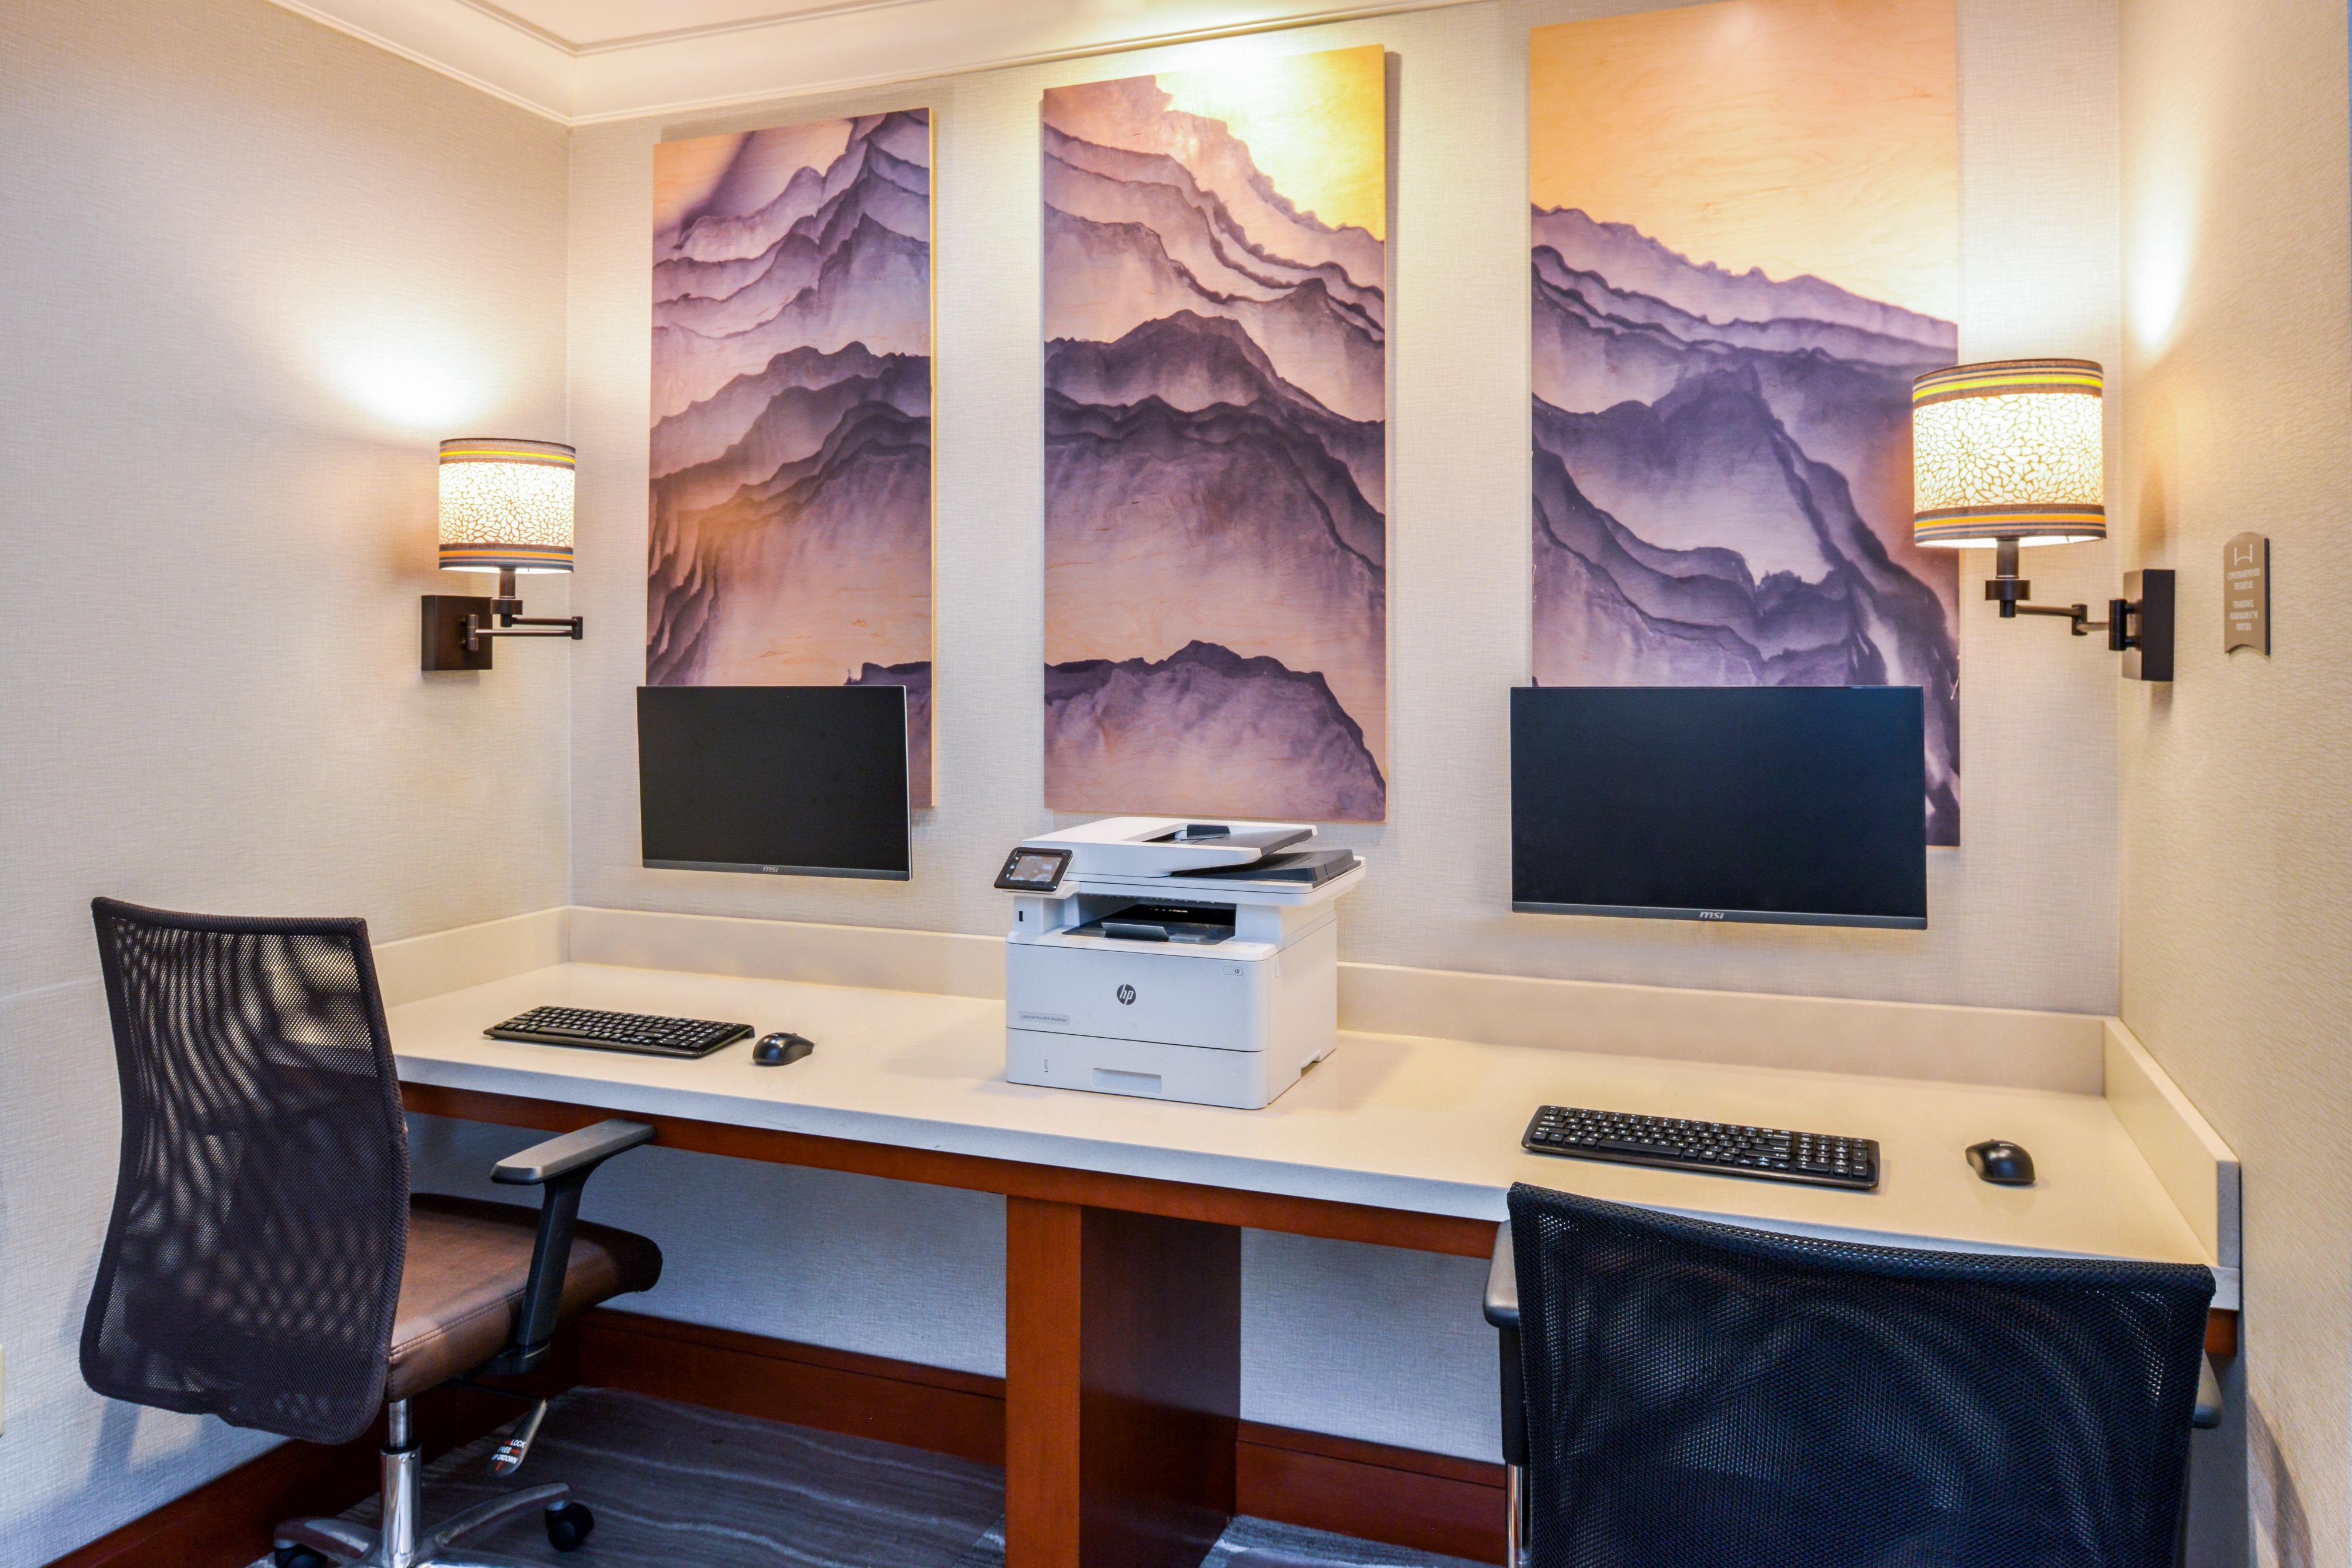 Stay connected at our 24/7 business center, fully equipped with printer, computer, and complimentary Wi-Fi, with additional services provided if needed. Guests can stay on top of their workload and preparation for meetings. For additional services, our friendly and helpful front desk staff can recommend further local businesses.